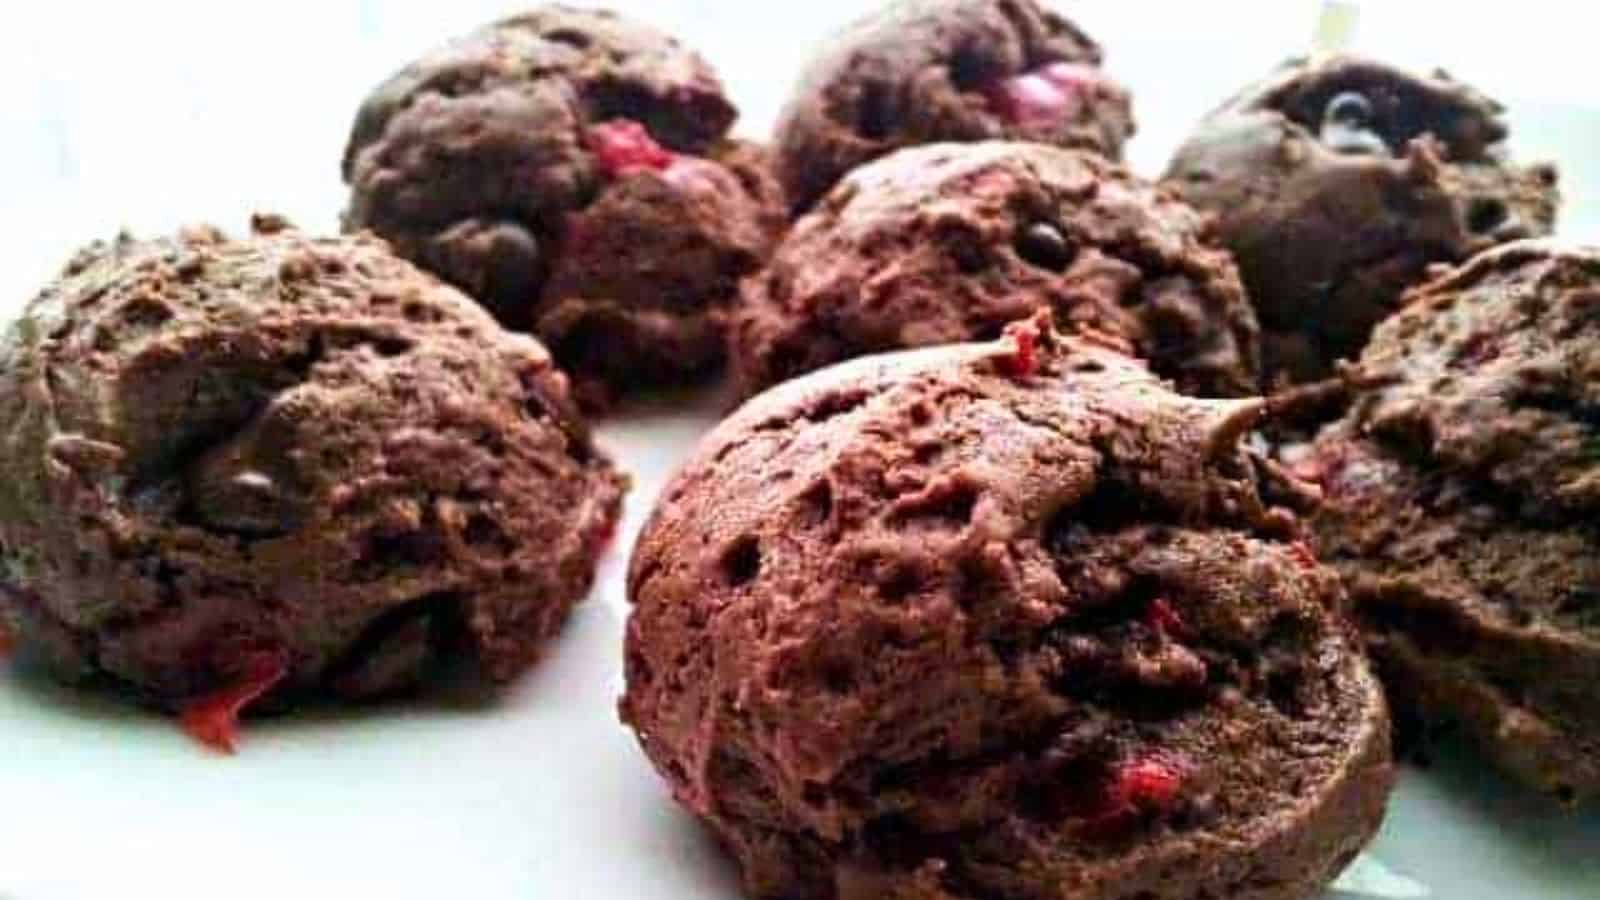 Image shows double Chocolate chunk cherry cookies on a white plate.